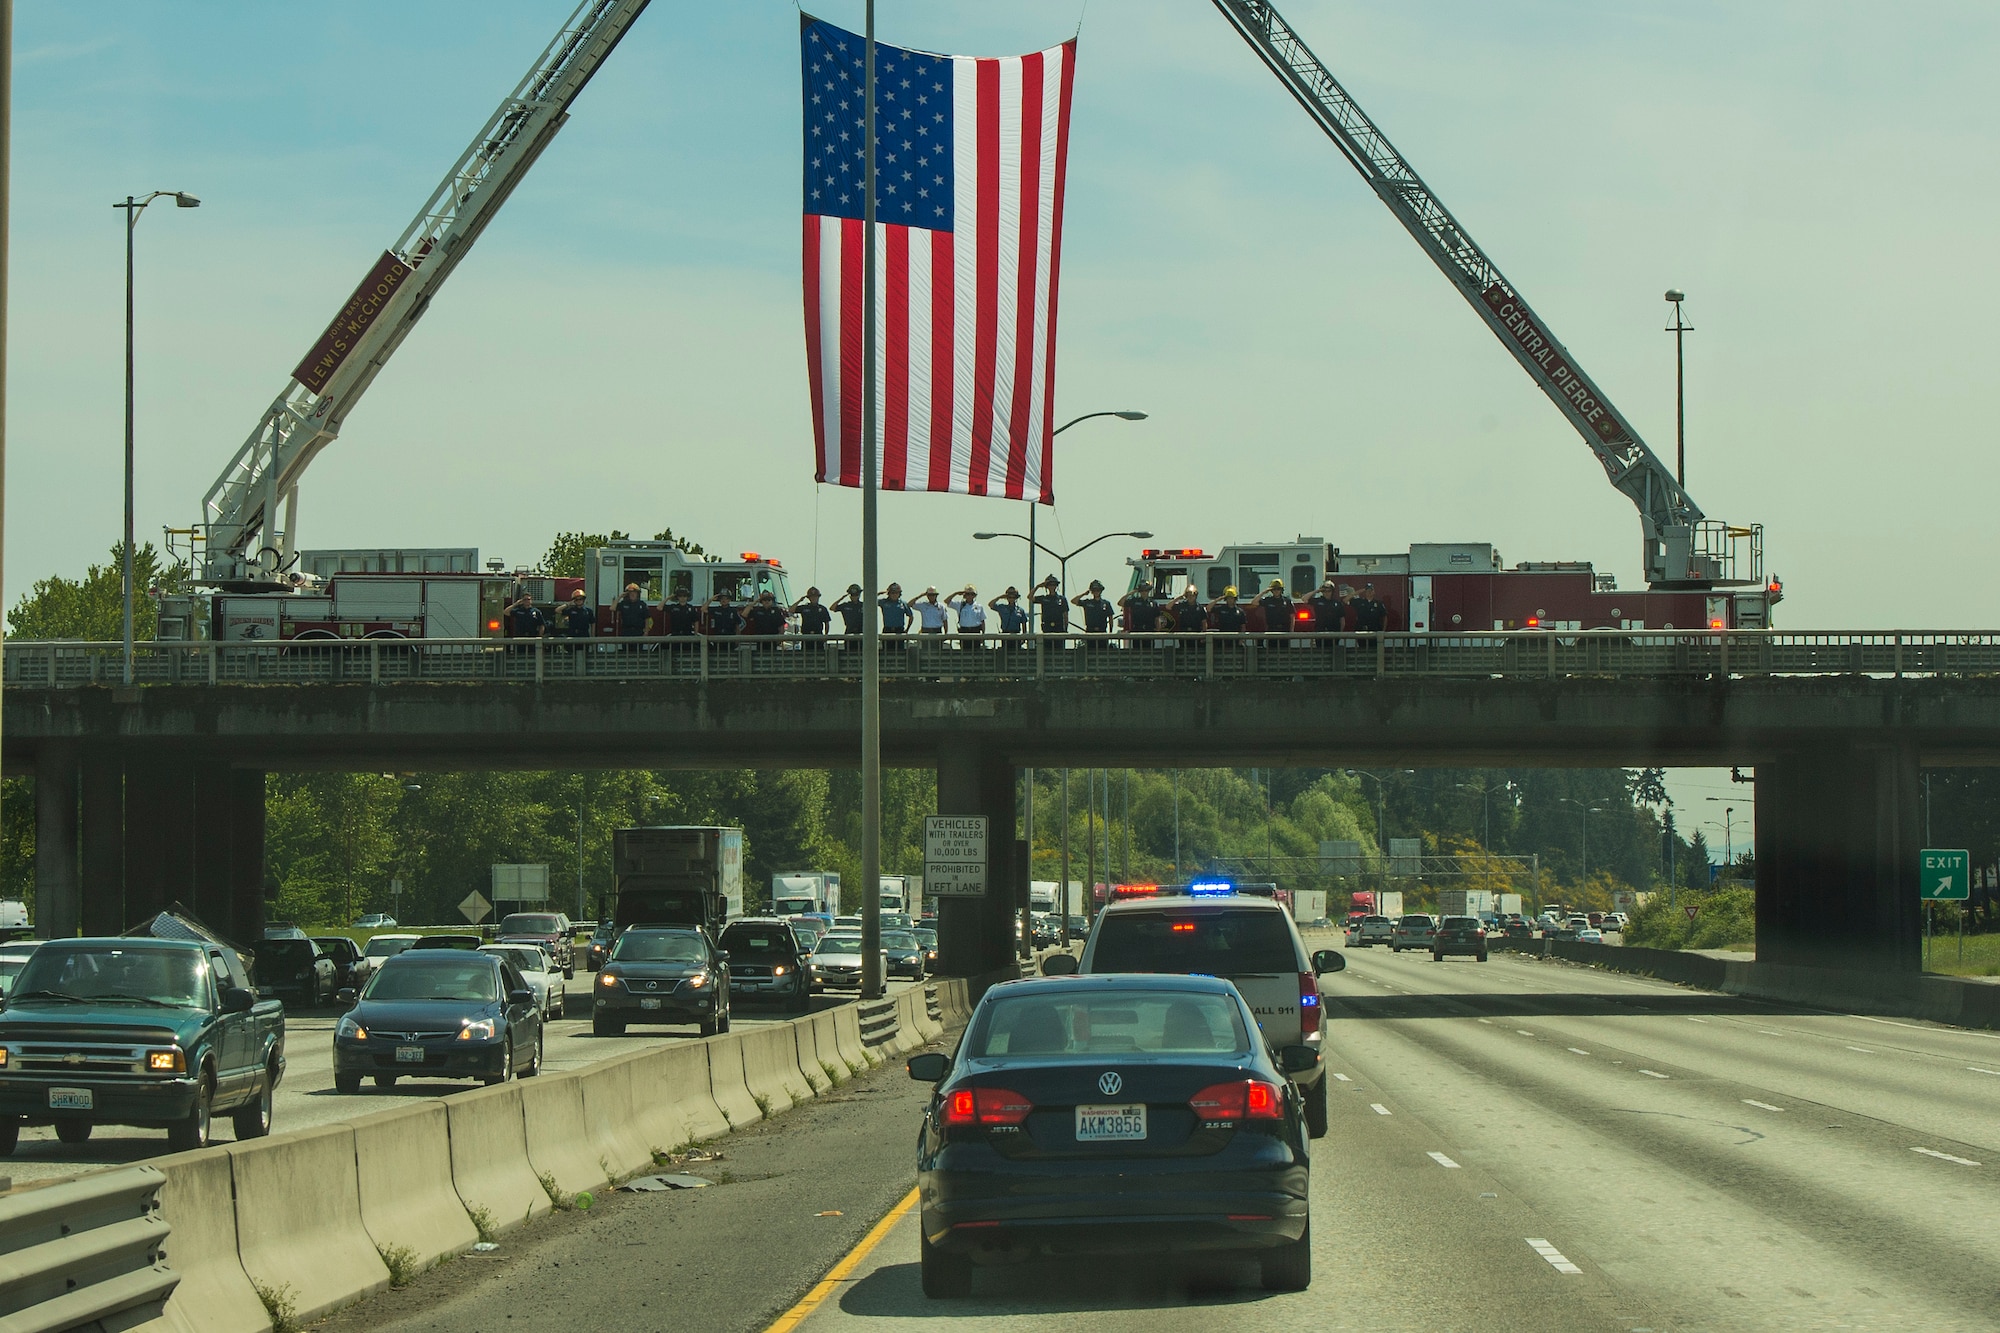 Central Pierce and Joint Base Lewis-McChord firefighters salute the procession of Capt. Douglas D. Ferguson's remains May 1, 2014, on an overpass in Tacoma, Wash. Ferguson, a Tacoma native, was killed while on a reconnaissance mission over Laos when his aircraft was shot down Dec. 30, 1969. (U.S. Air Force photo/Tech. Sgt. Sean Tobin)